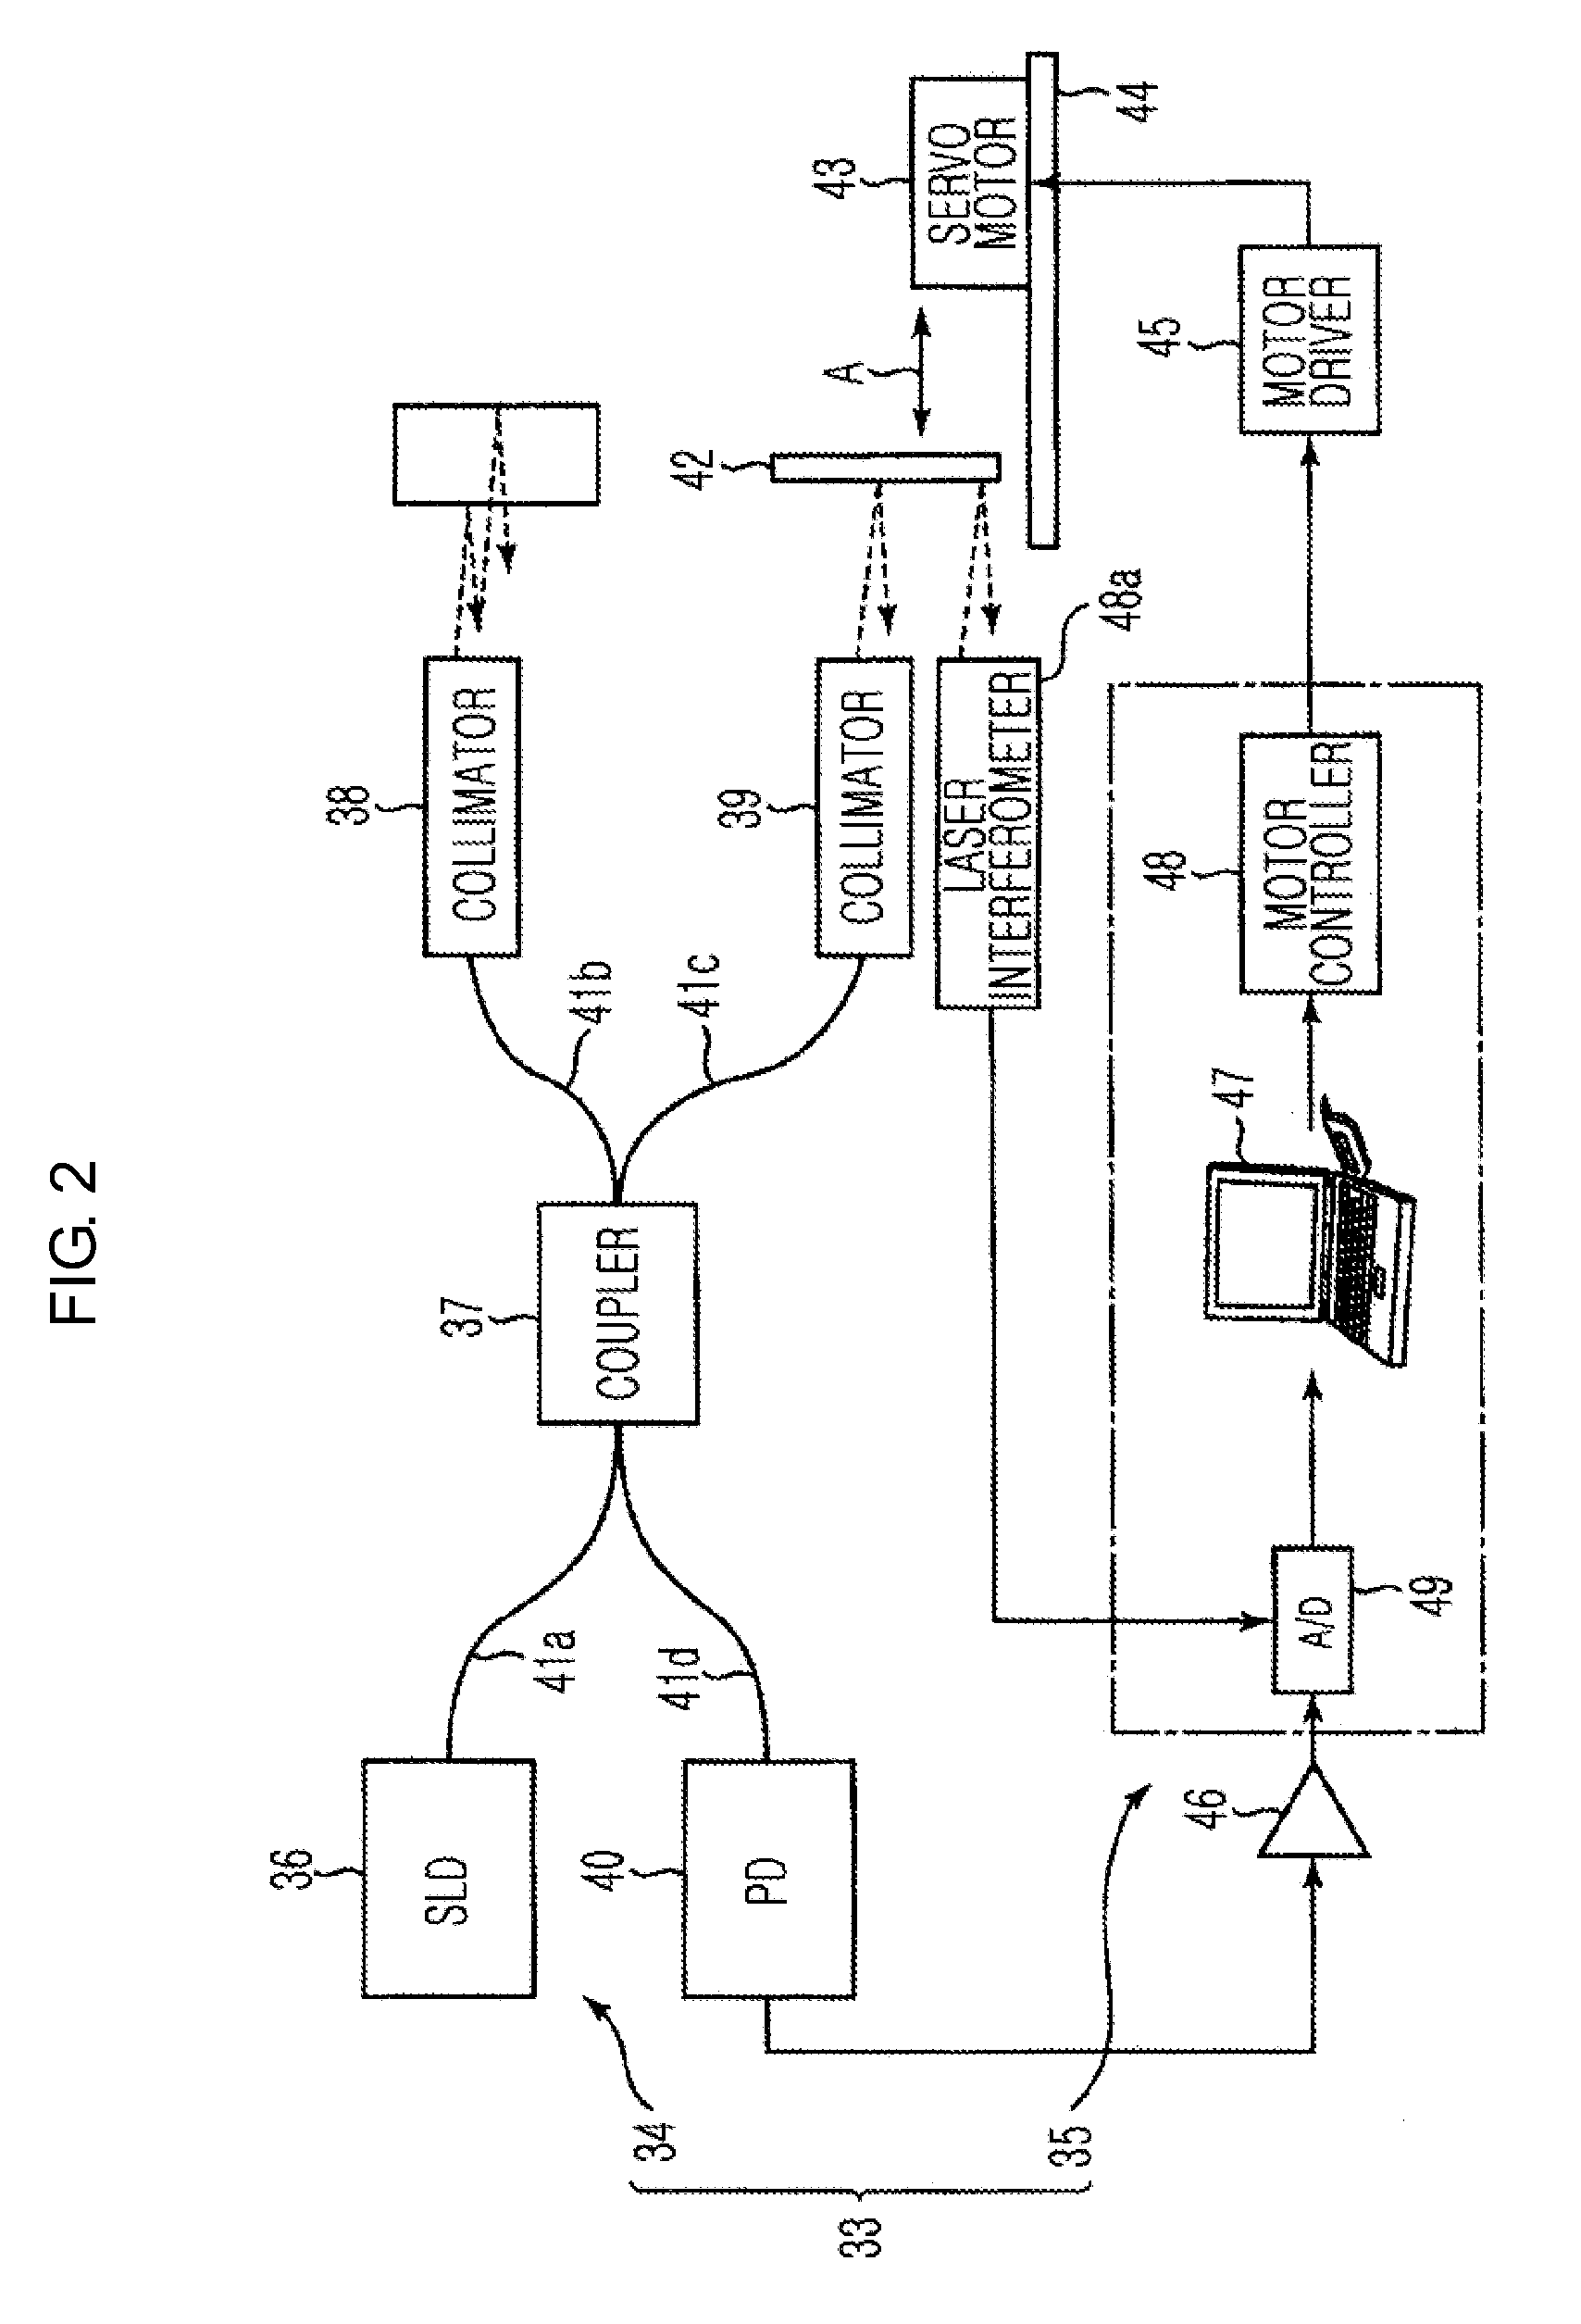 Component in processing chamber of substrate processing apparatus and method of measuring temperature of the component